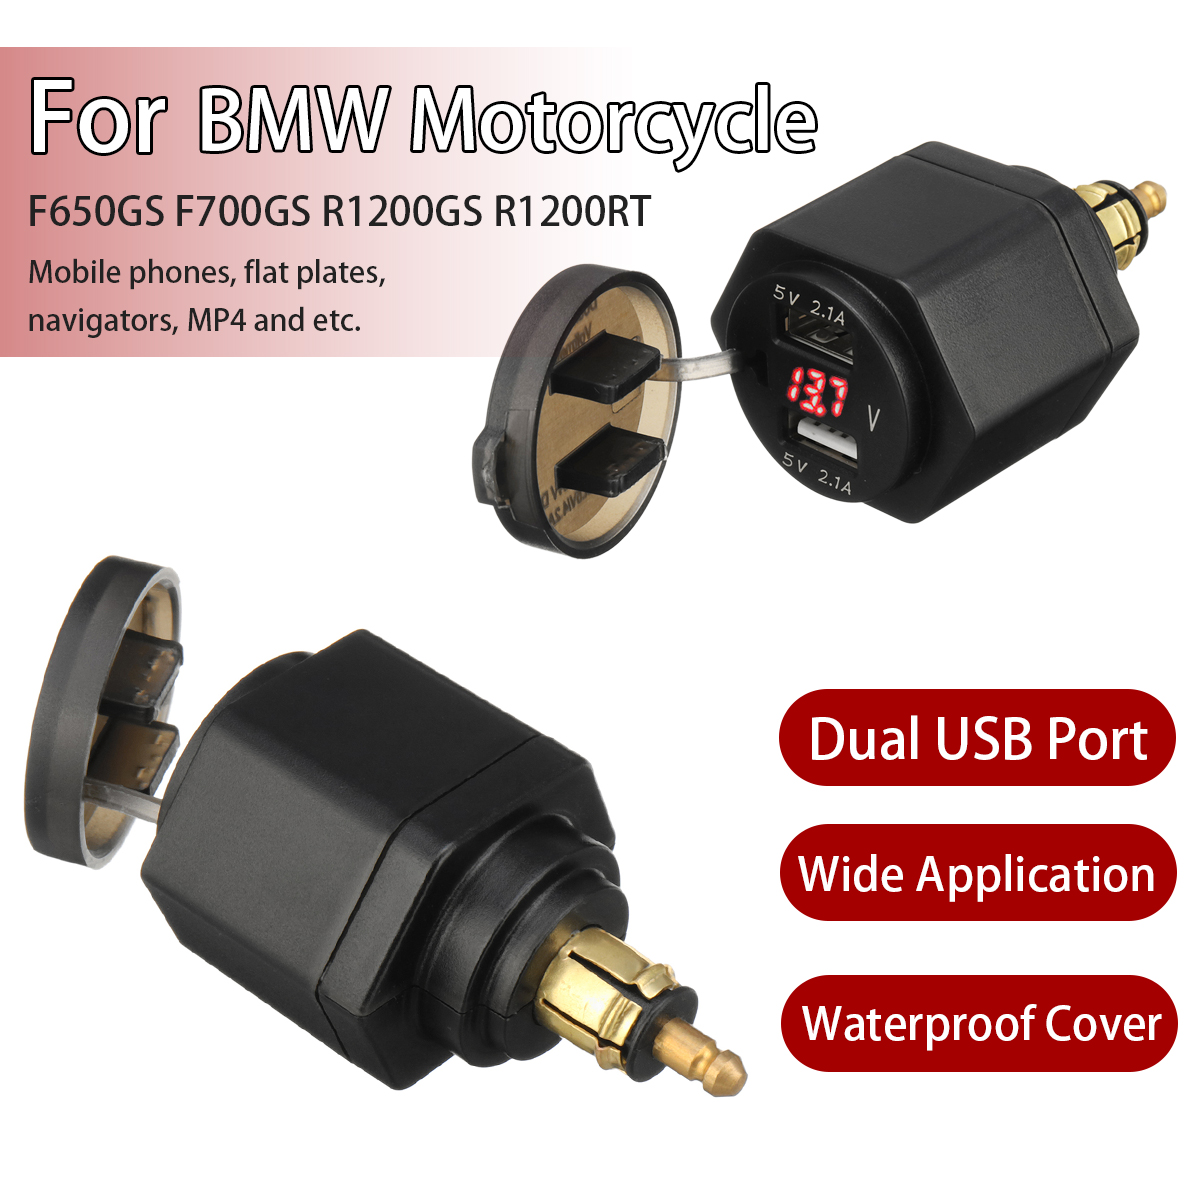 1X 4.2A Dual USB Voltage Display Motorcycle Charger For BMW F800GS F650GS F700GS